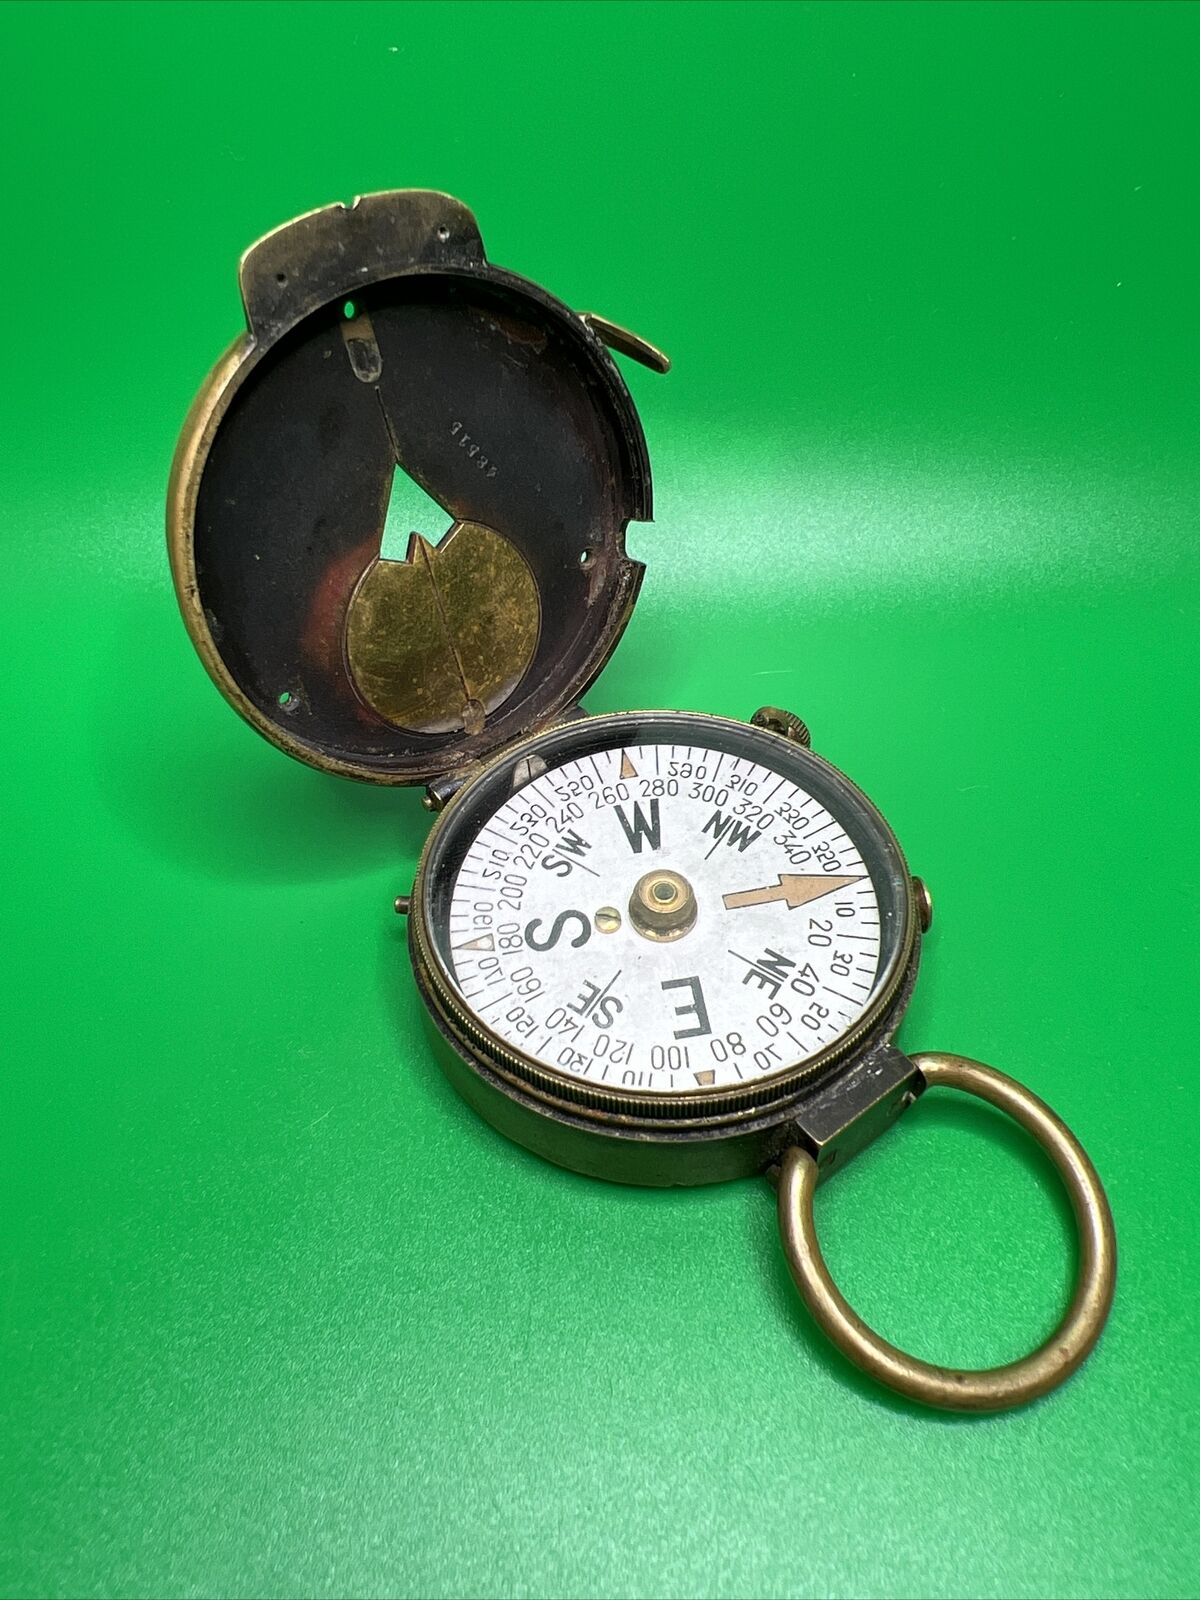 WWI VINTAGE US ENGINEER CORPS BRASS COMPASS CRUCHON & EMONS CA 1918